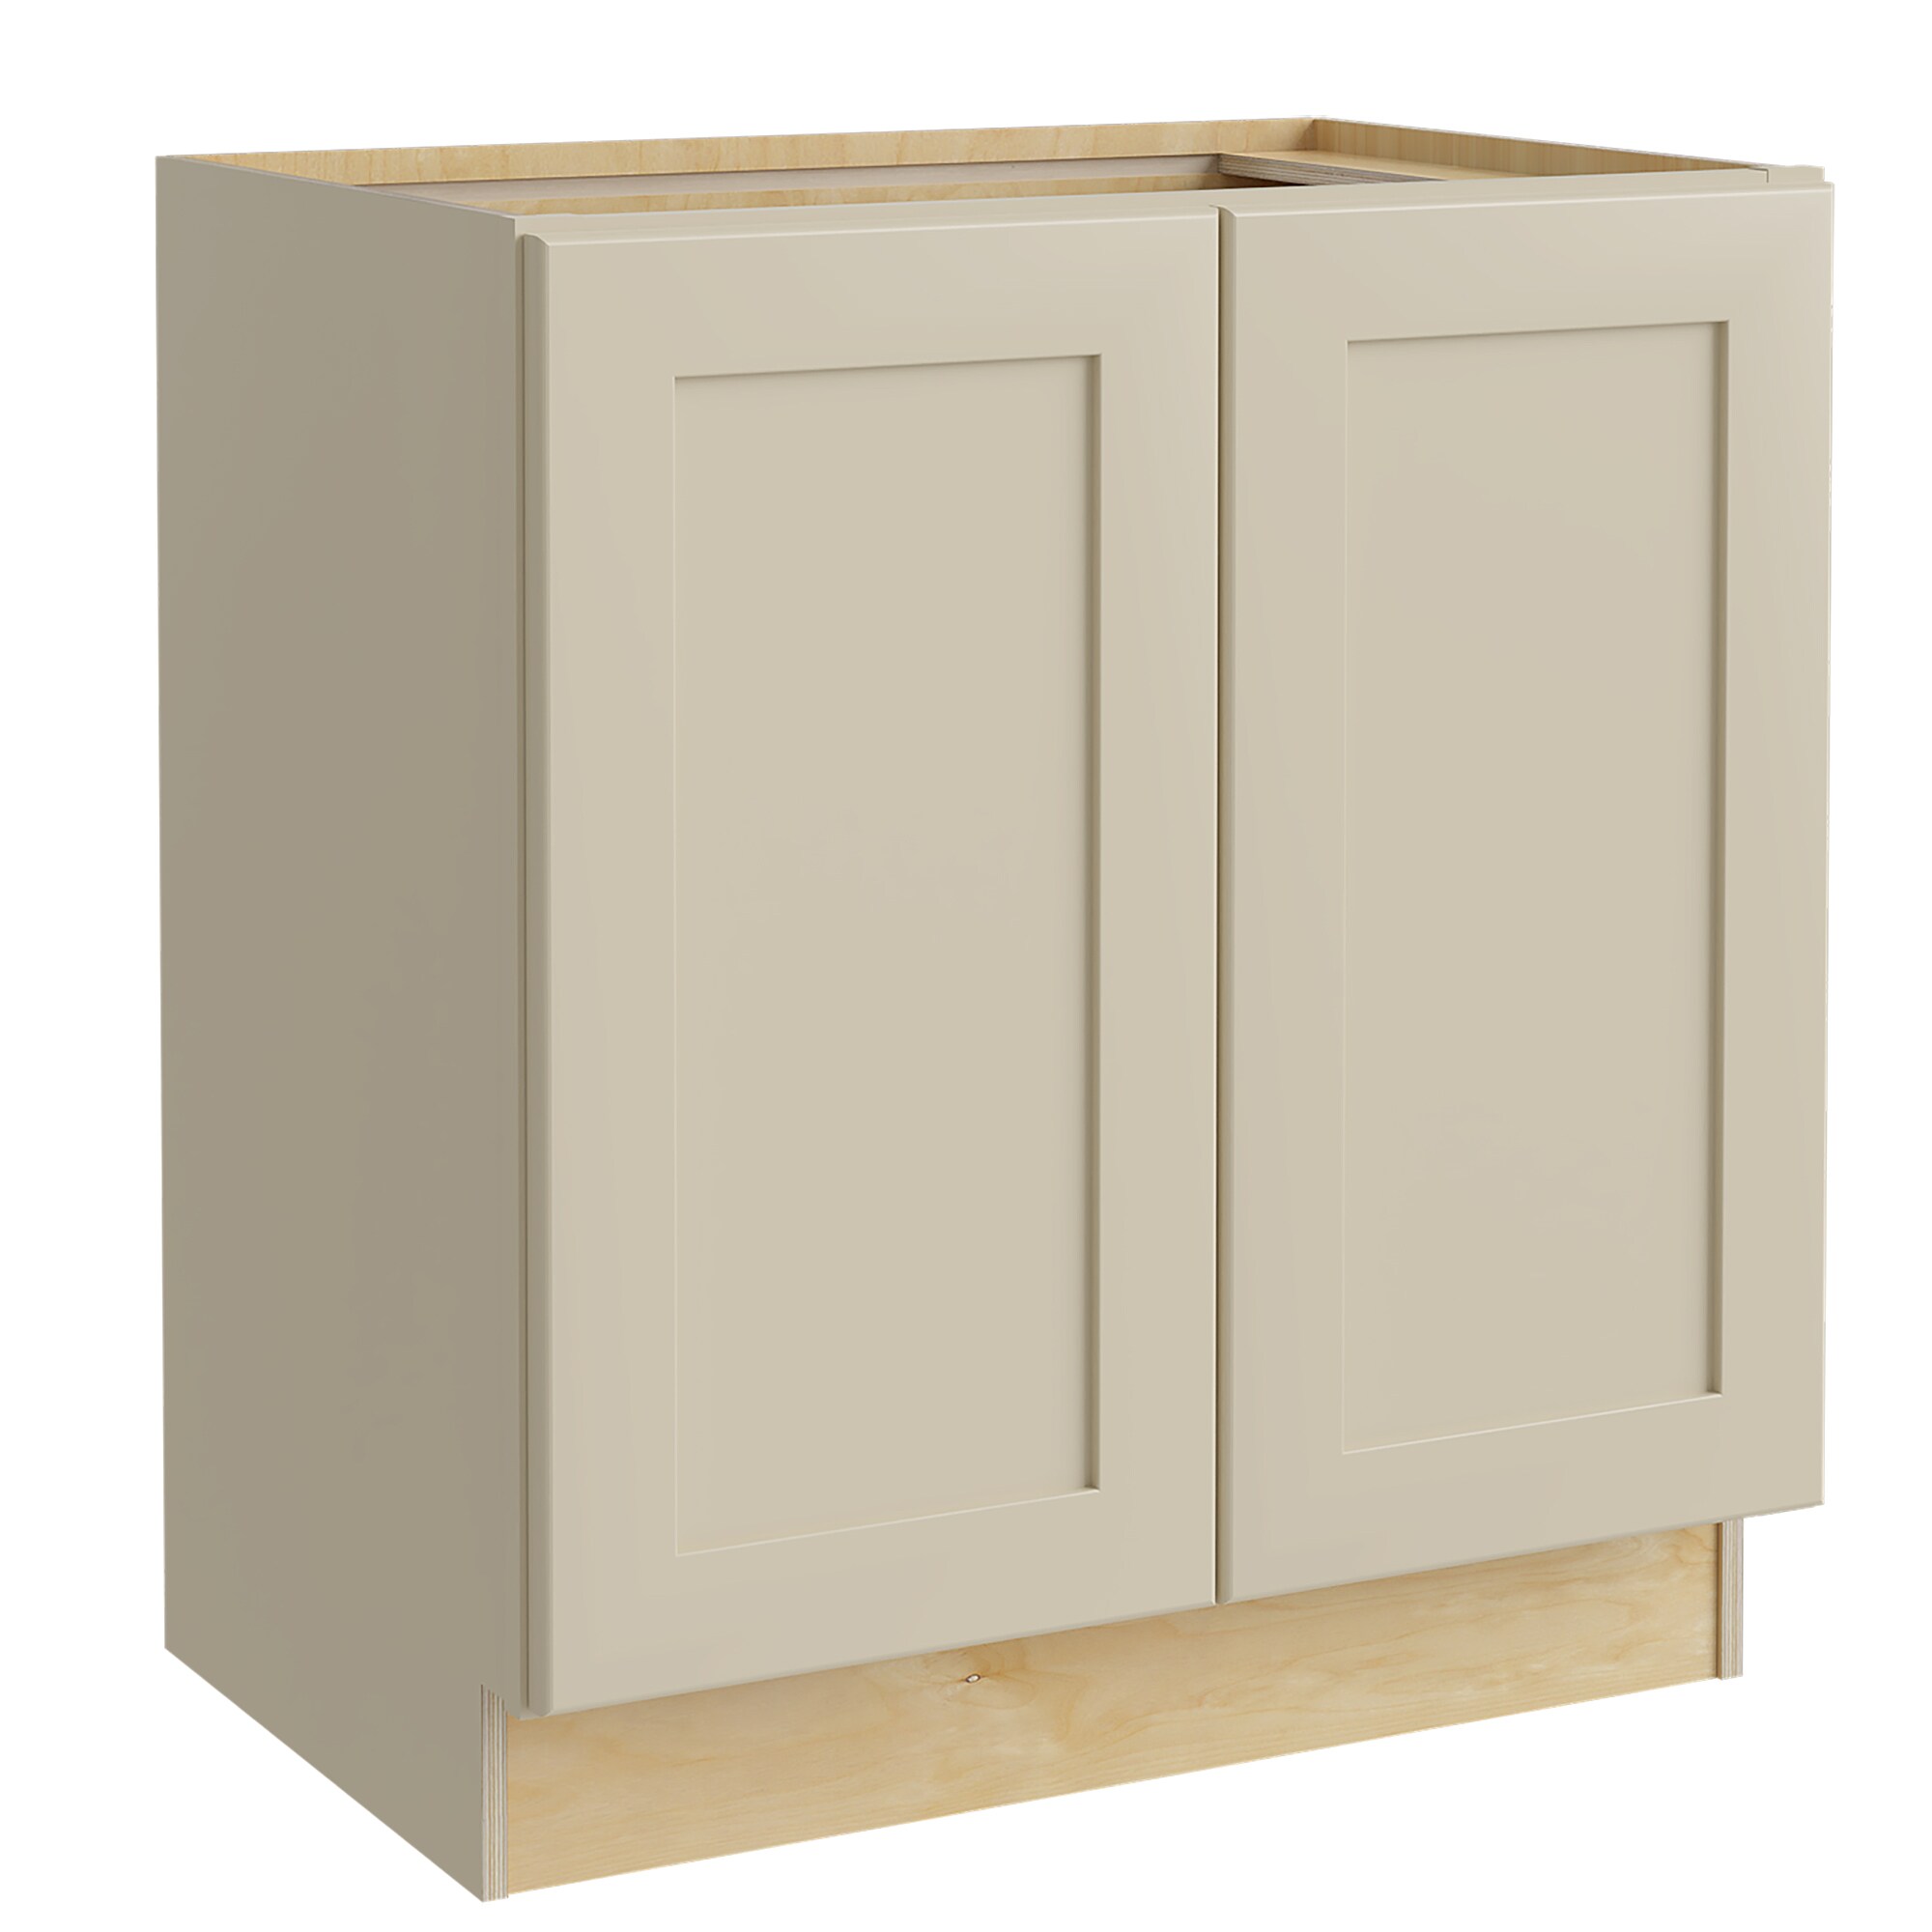 Luxxe Cabinetry 30-in W x 34.5-in H x 21-in D Norfolk Blended Cream Painted Door Base Fully Assembled Semi-custom Cabinet in Off-White | VB3021FH-NBC